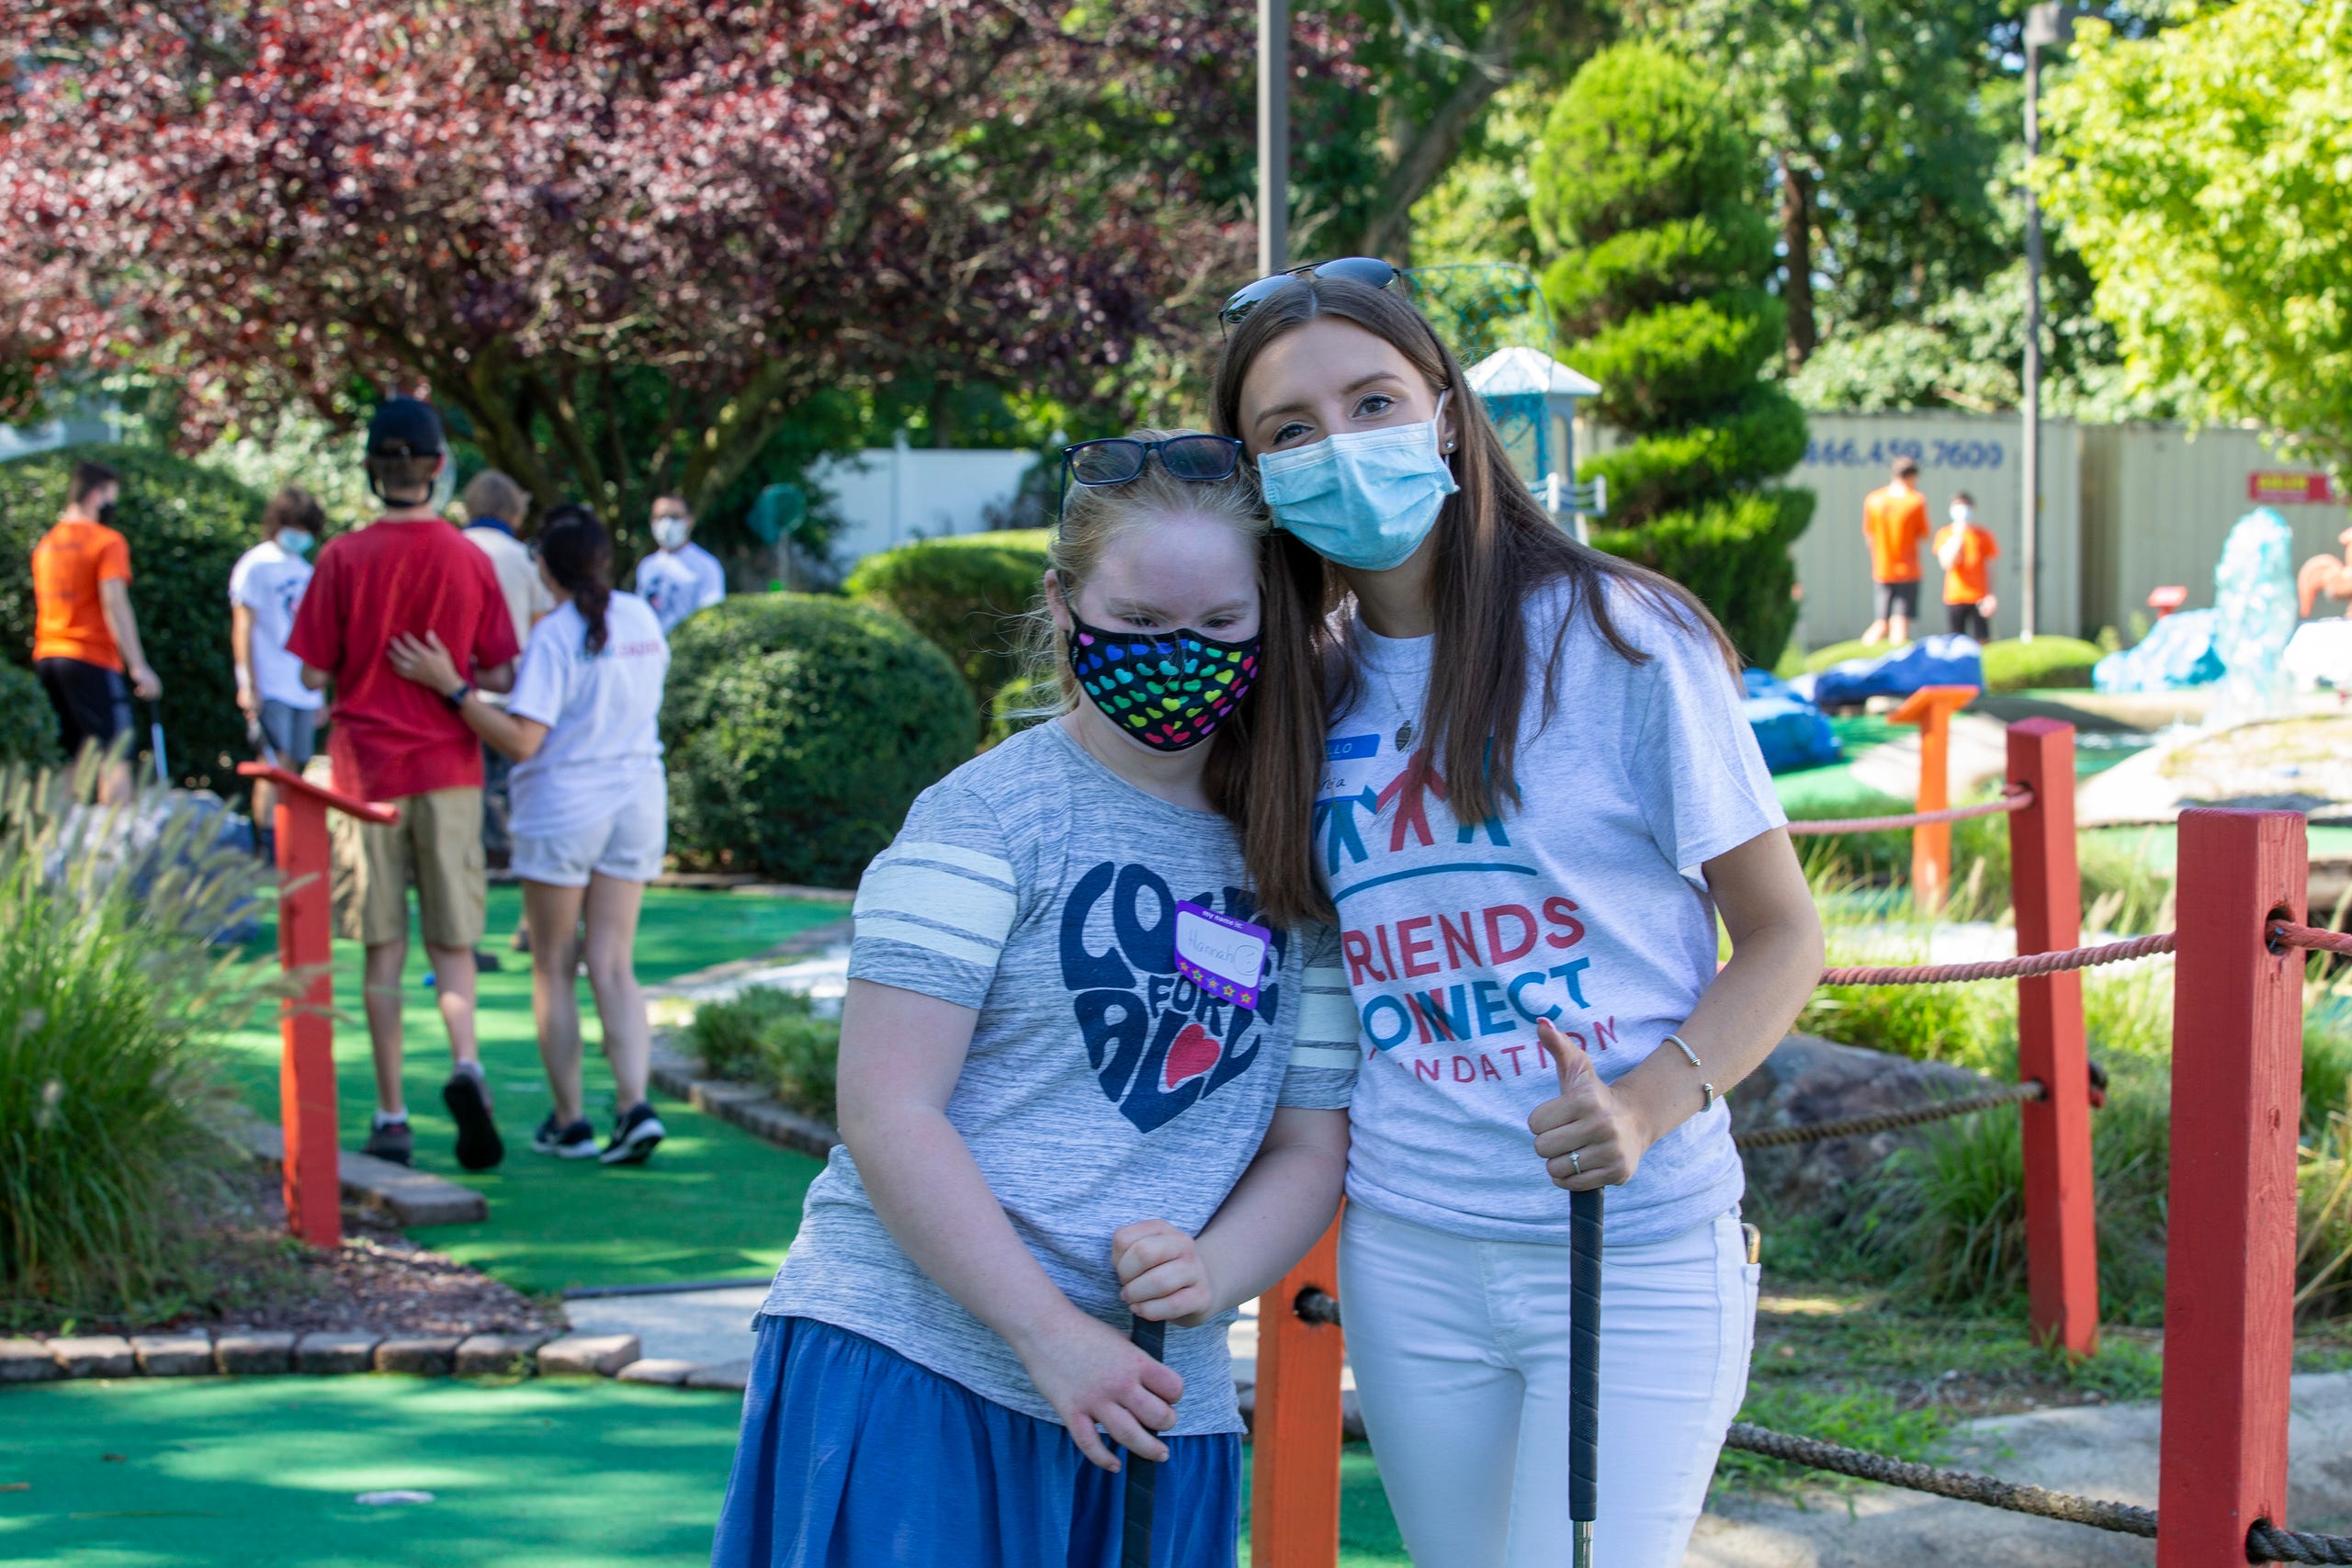 (right) Sophia Ziajski, 19, of Middletown, who runs the nonprofit Friends Connect Foundation, poses with Hannah Piasecki, 13, of Middletown as members of the Middletown North boys soccer team play mini-golf with a group of special-needs kids as part of Friends Connect Foundation at TST BBQ & Mini Golf in Middletown, NJ Tuesday, August 18, 2020.